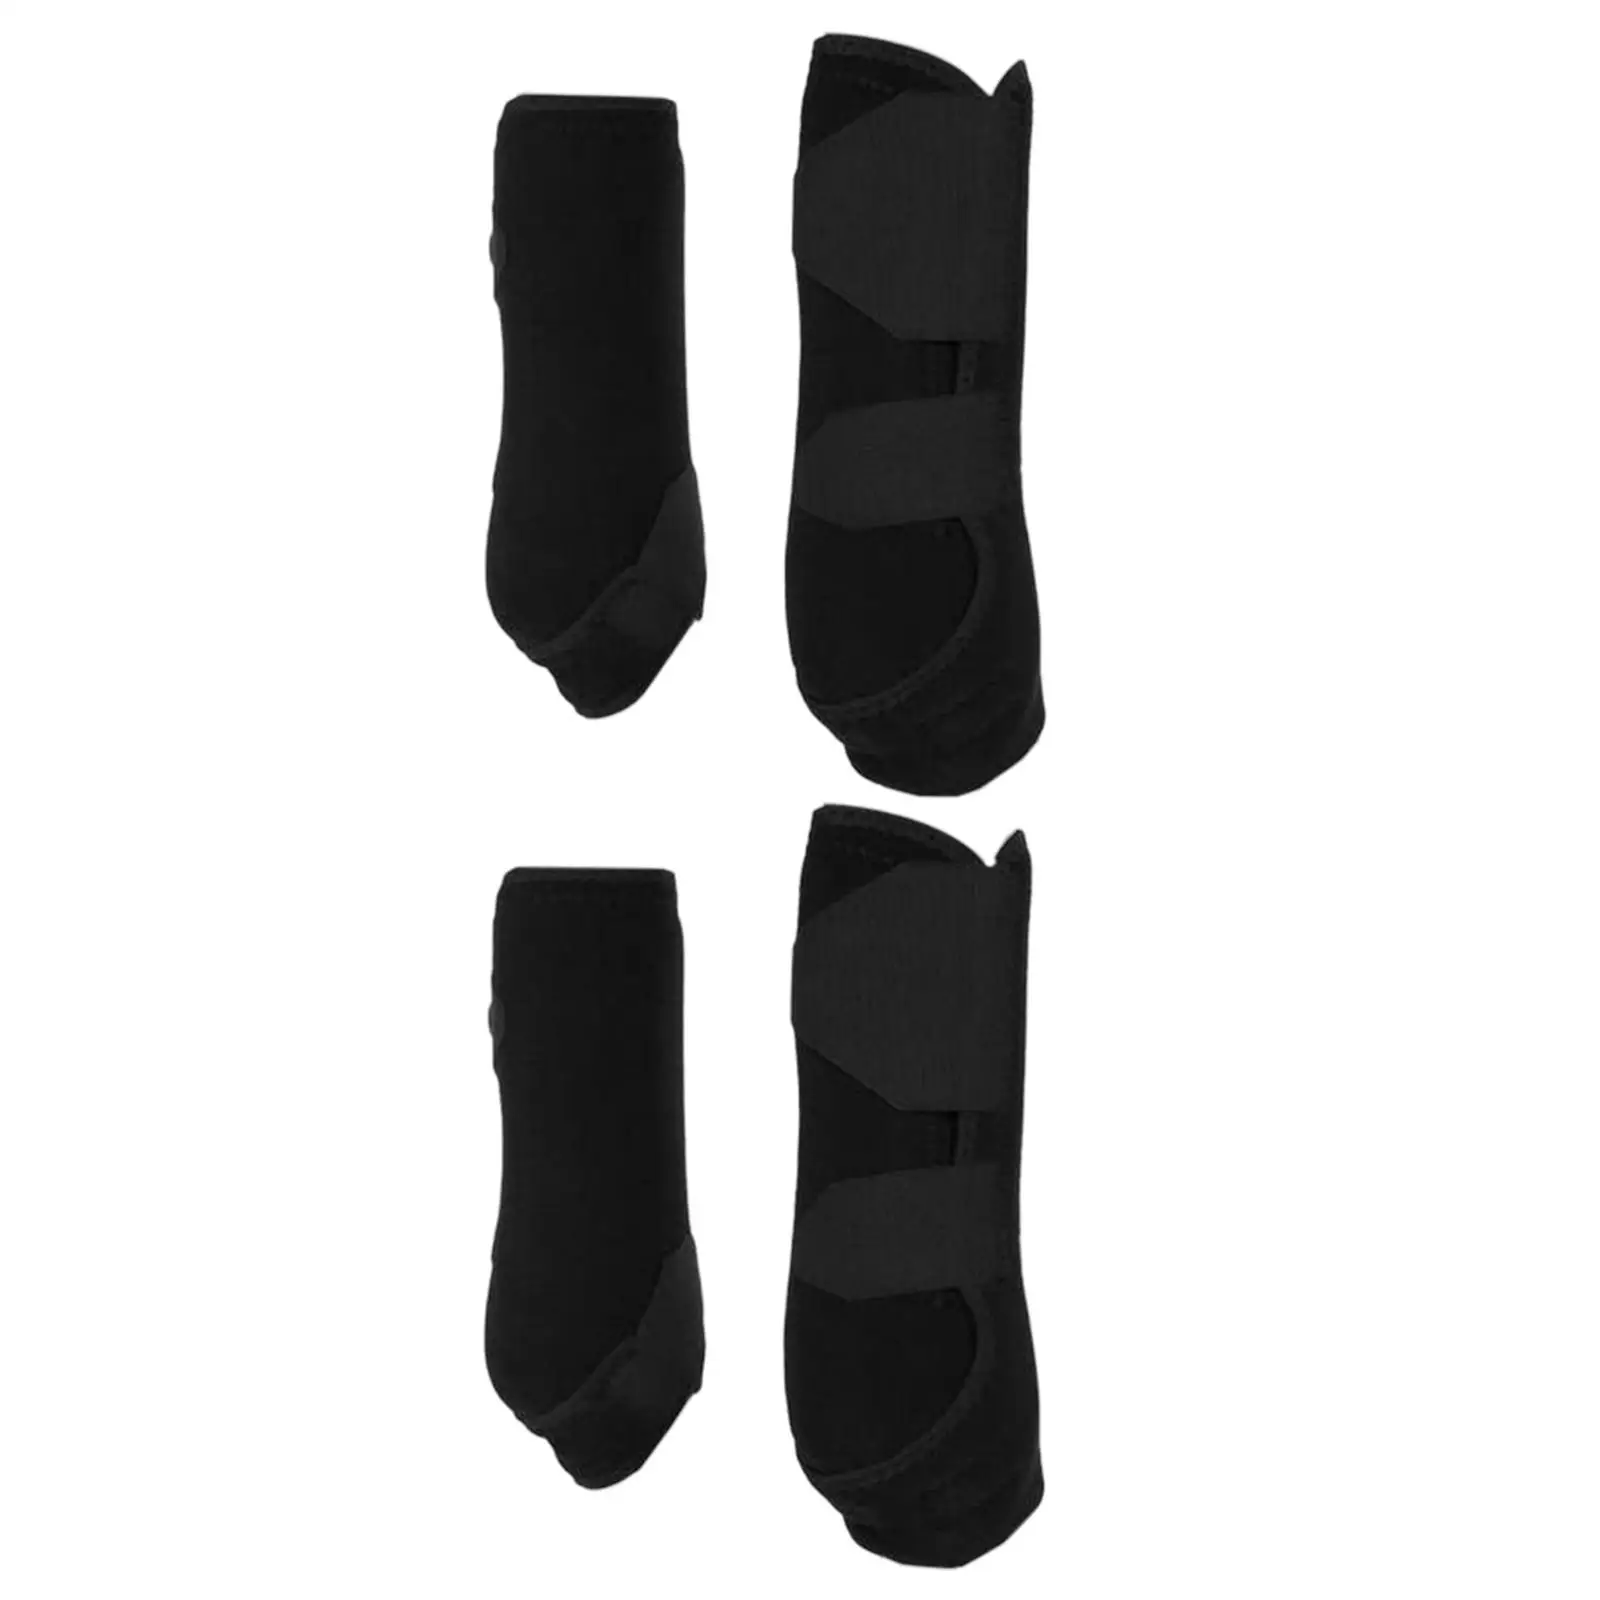 4Pcs Neoprene Horse Boots Leg Wraps Shock Absorbing Tendon Protection Guard for Jumping Riding Training Equestrian Equipment